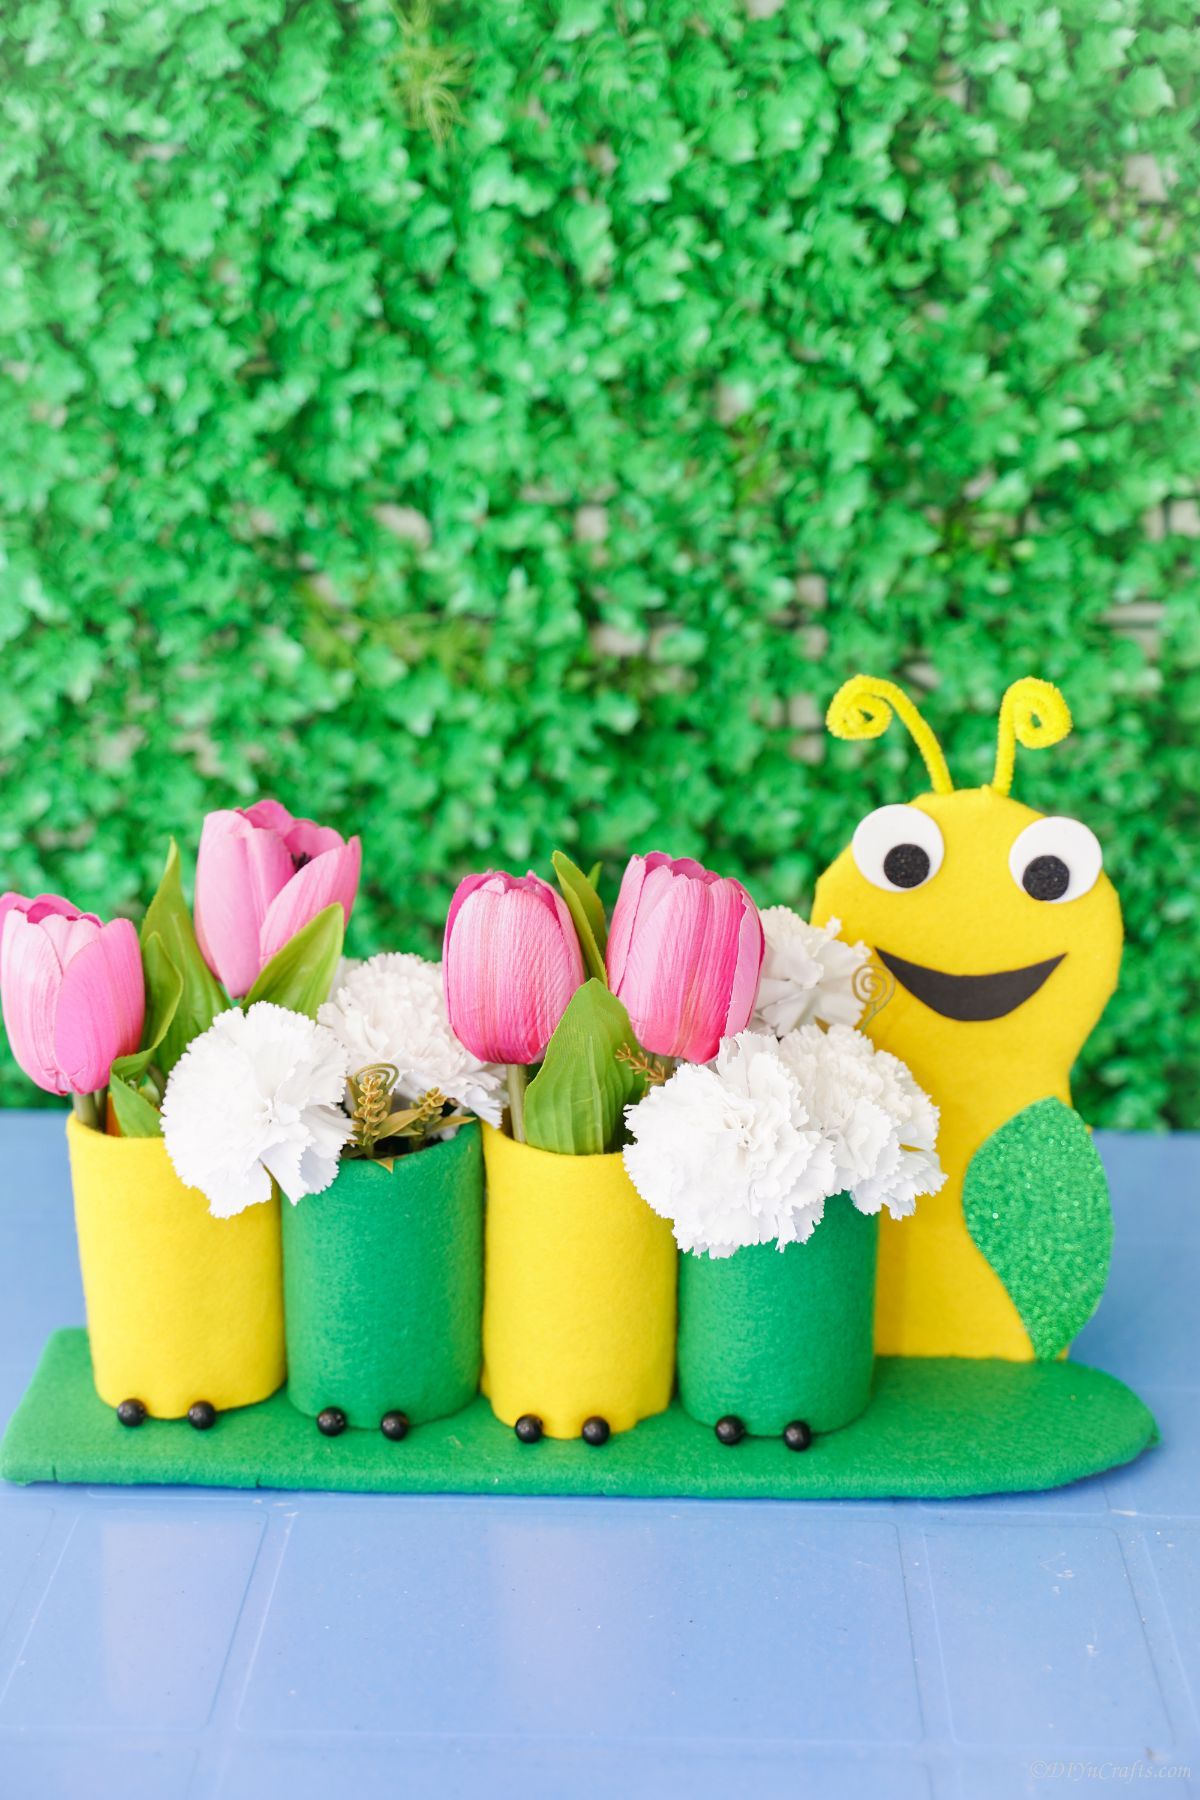 green and yellow caterpillar holding pink and white flowers in front of green shrub background